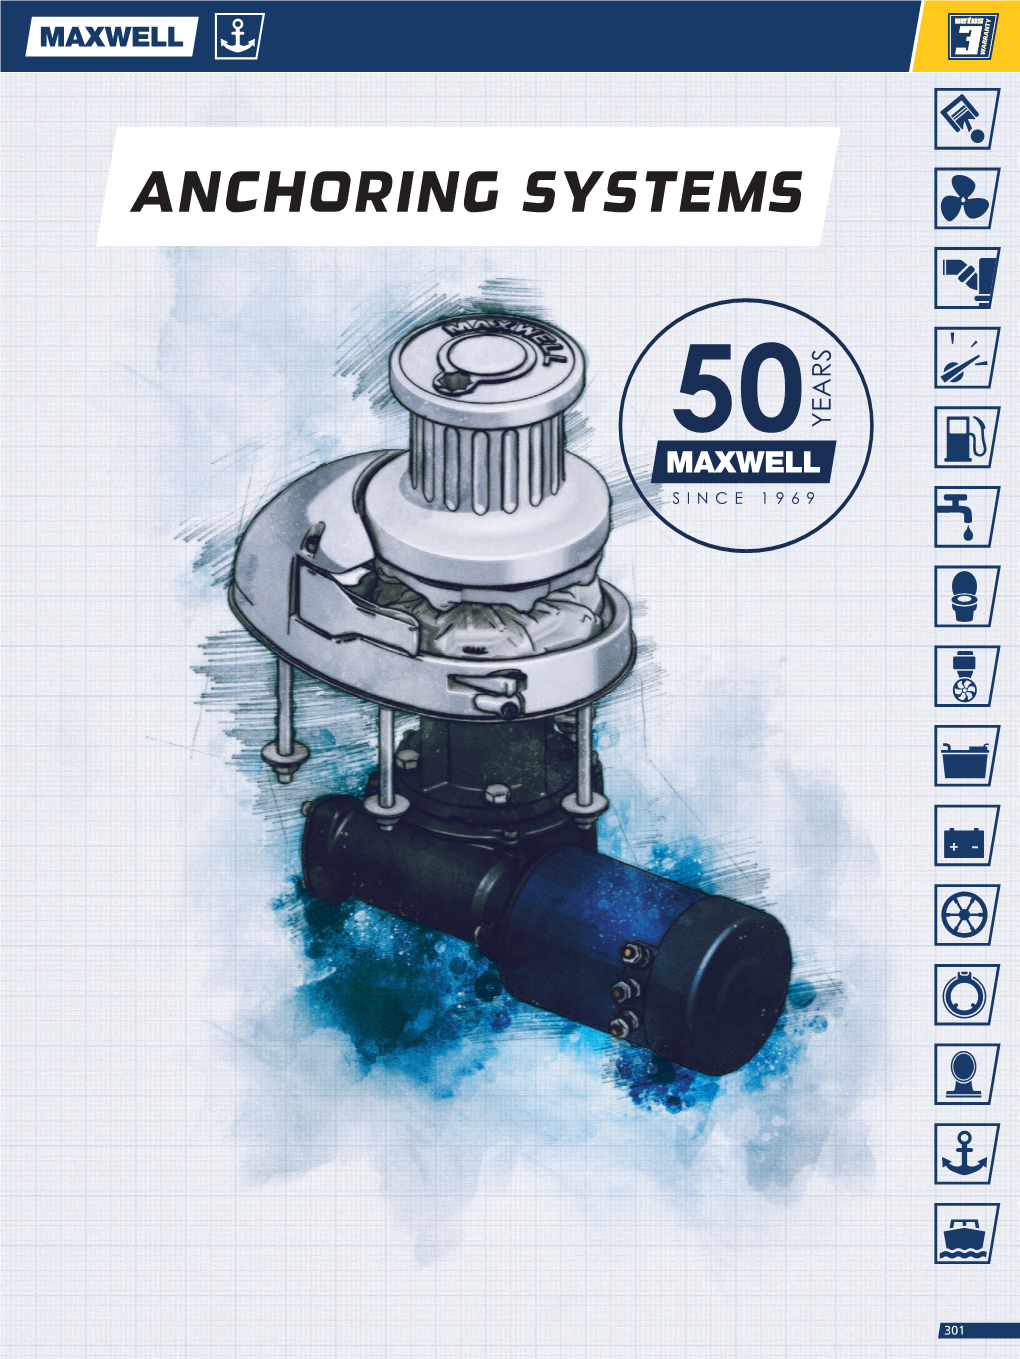 Anchoring Systems